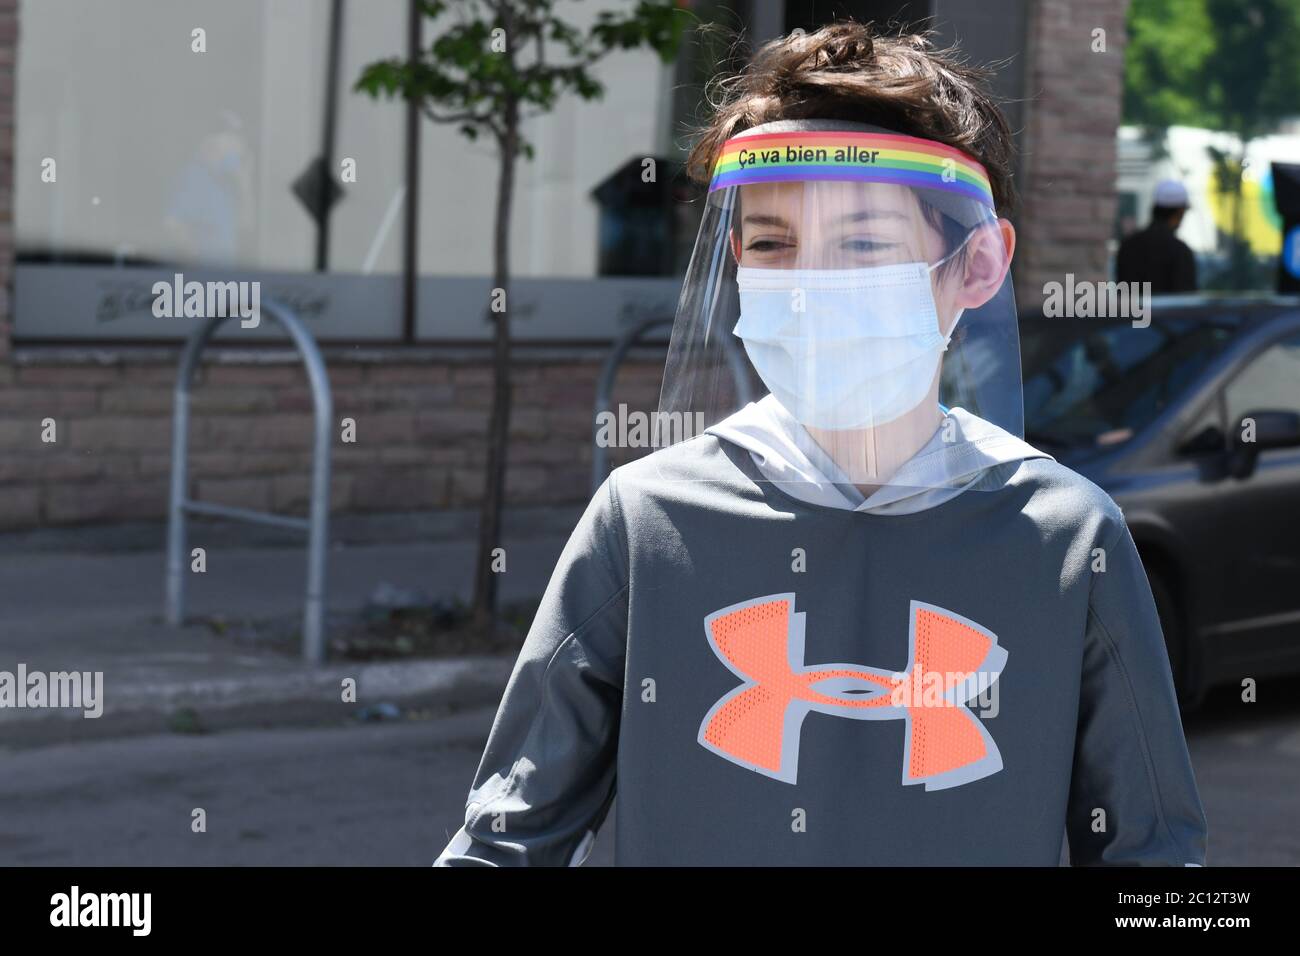 Boy wearing protective face masks and face shields during Covid-19 Pandemic in Montreal Canada (Model released) Stock Photo